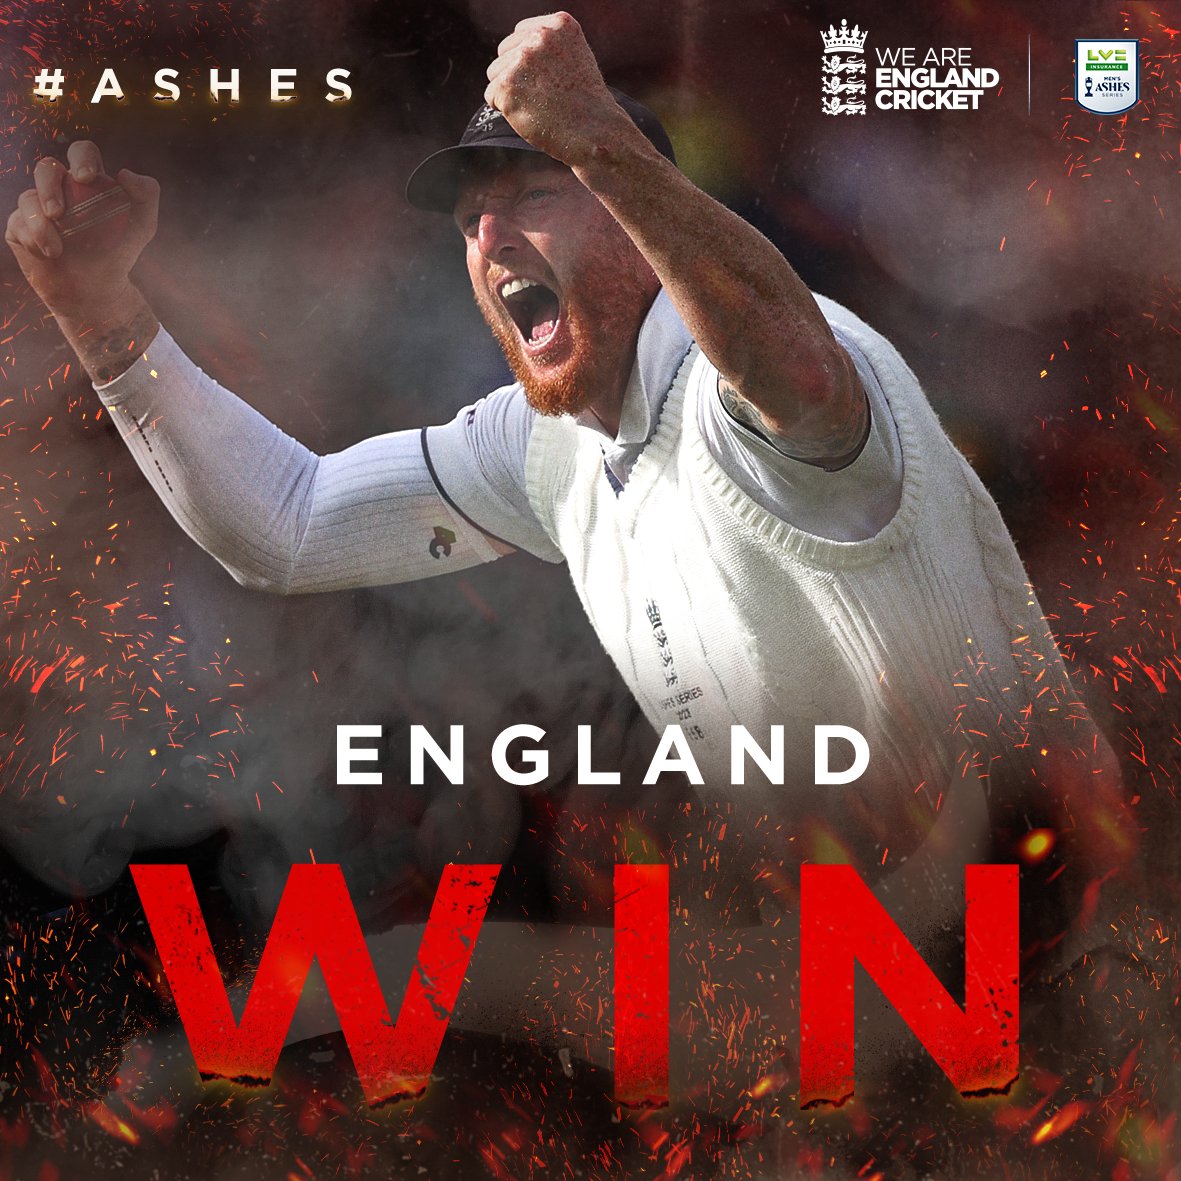 🏴󠁧󠁢󠁥󠁮󠁧󠁿 ENGLAND WIN! 🏴󠁧󠁢󠁥󠁮󠁧󠁿 A truly incredible Ashes series comes to an end... Well played, @CricketAus 🤝 #EnglandCricket | #Ashes